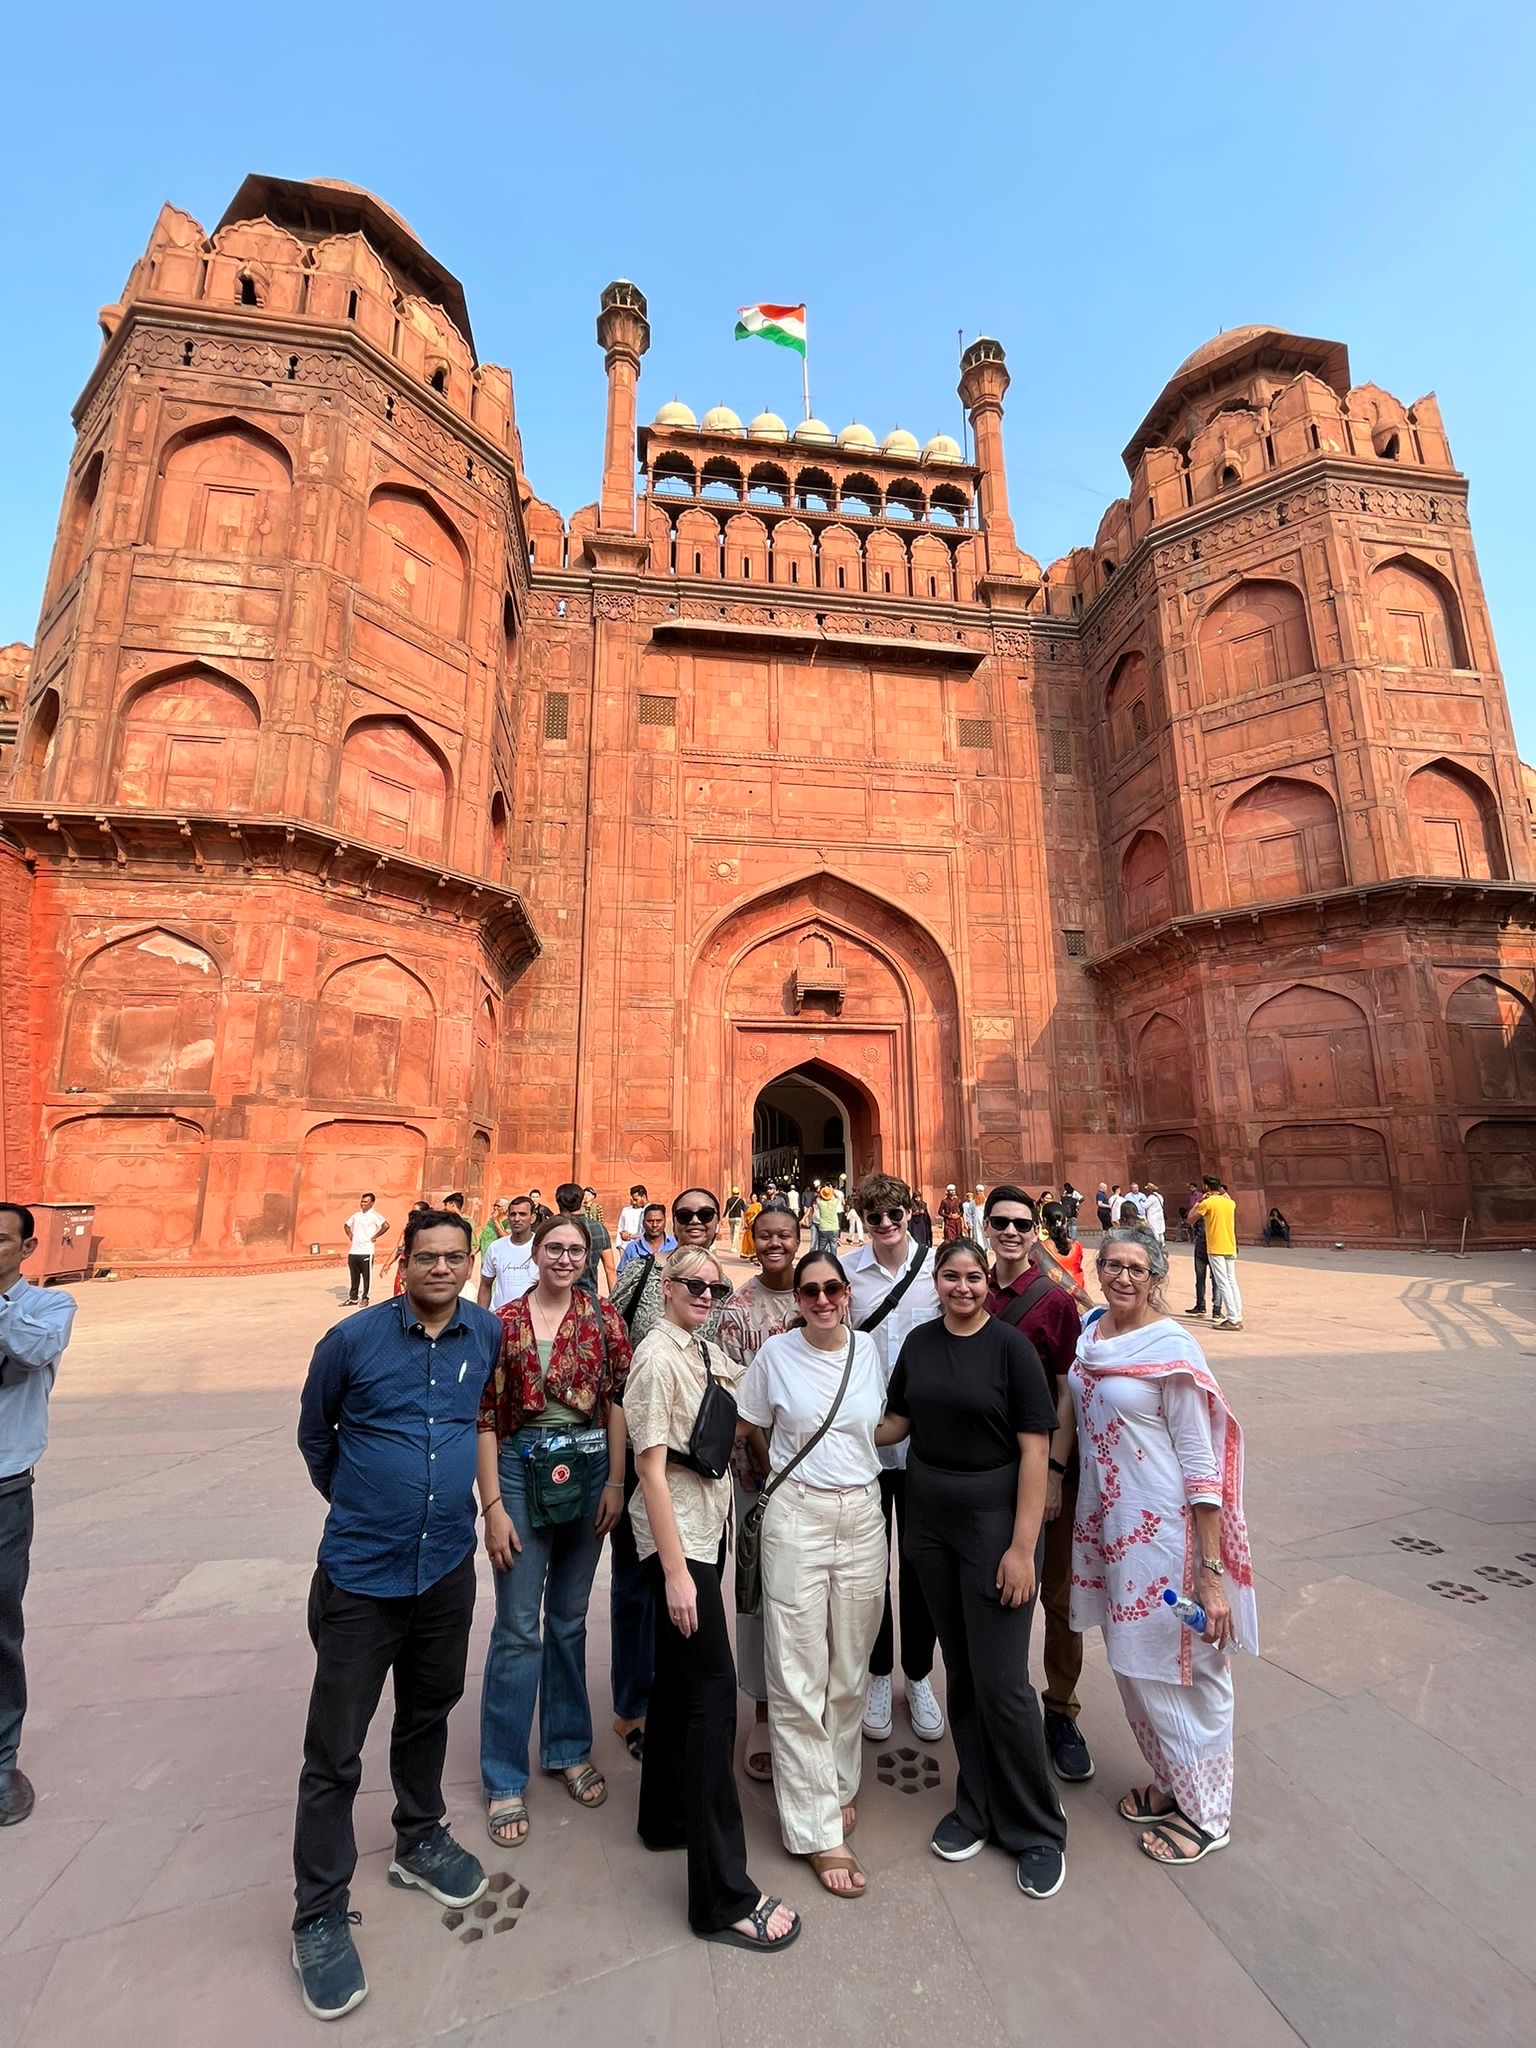 Group of people standing in front of large red-brown building with Indian flag